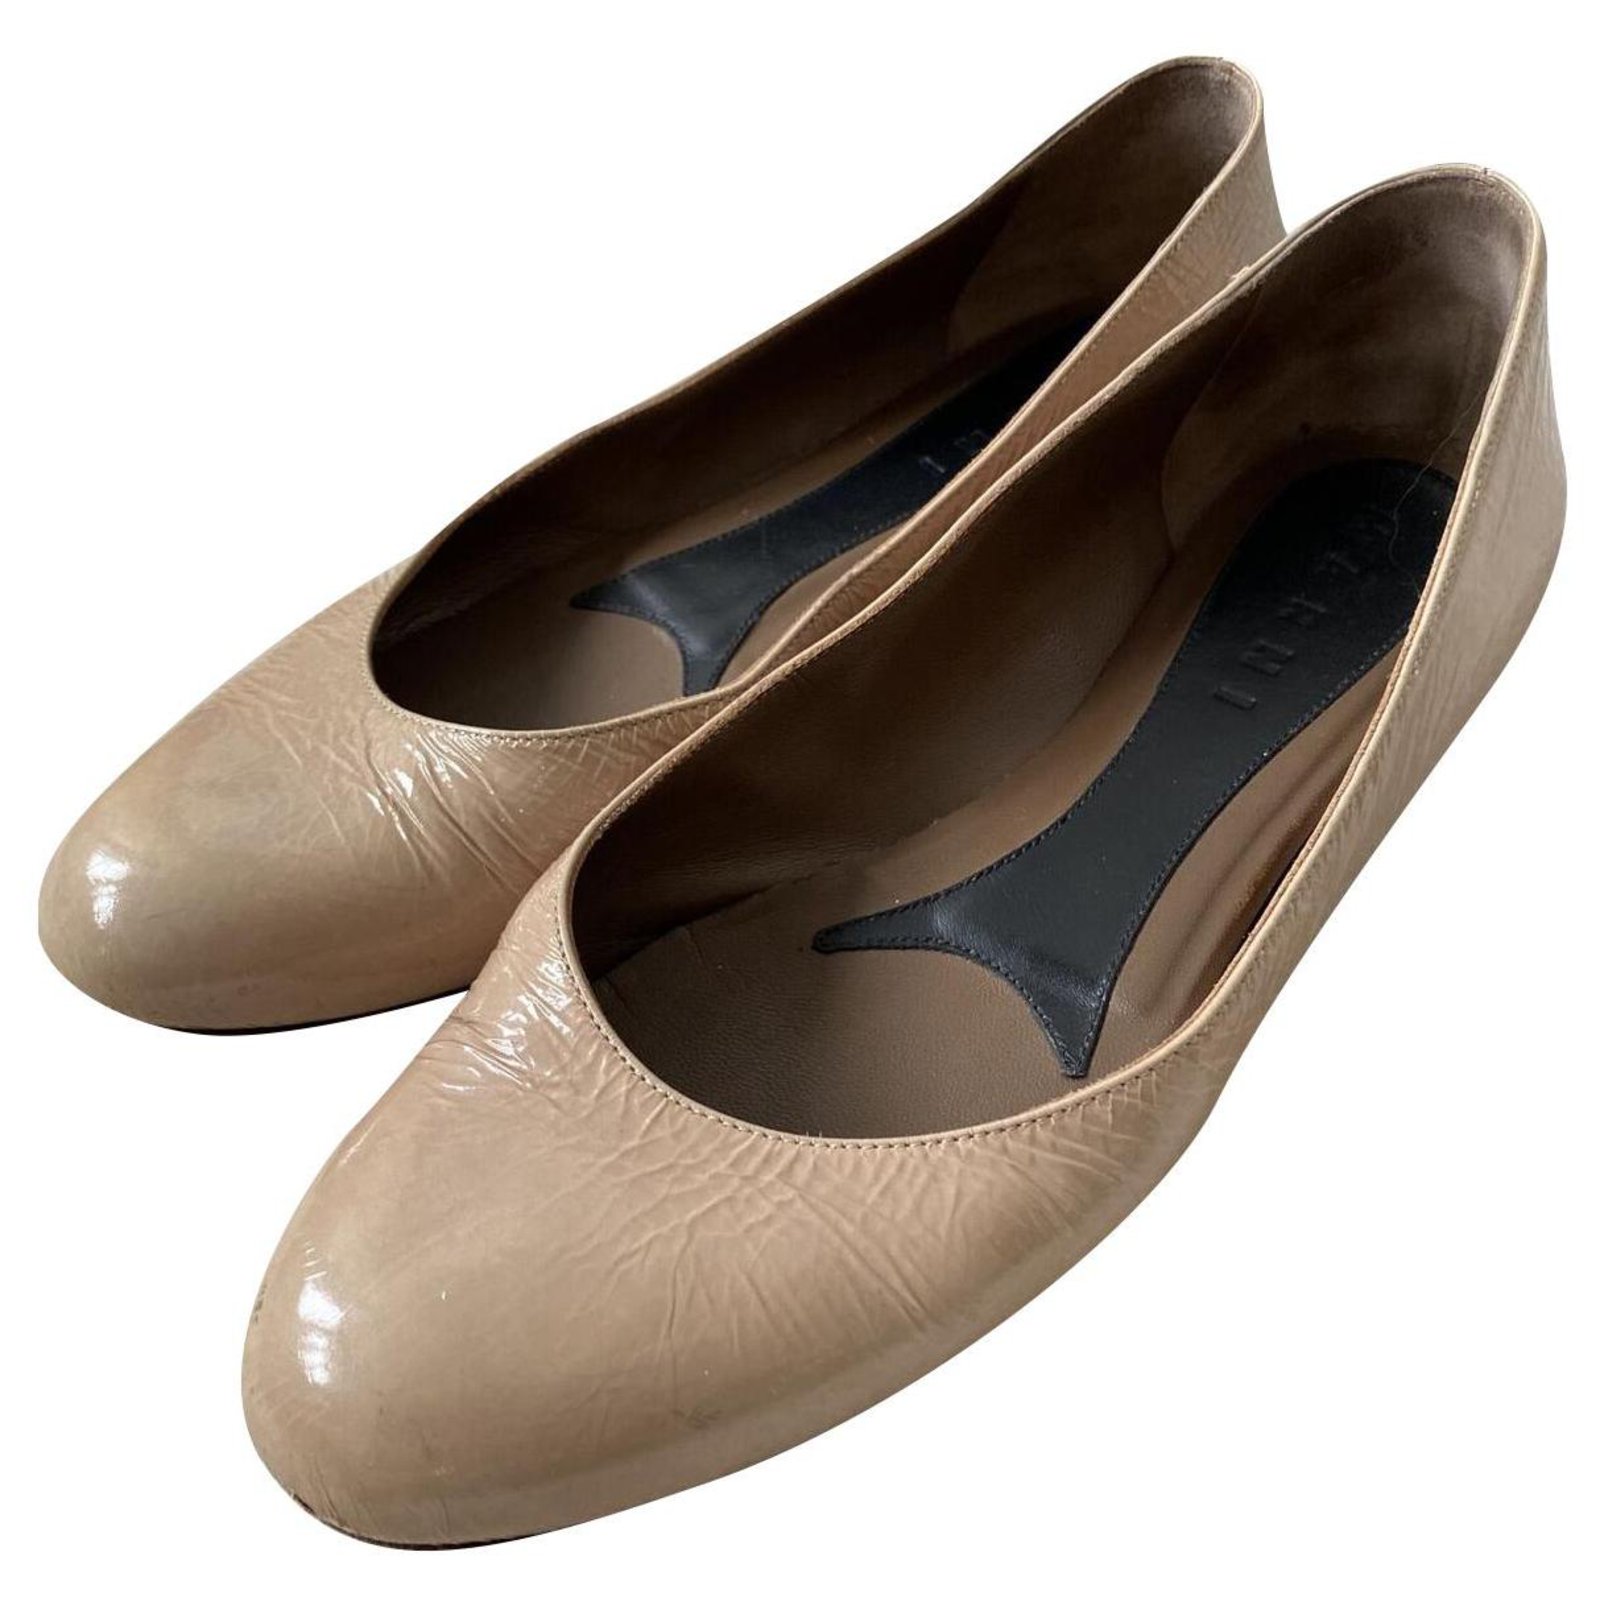 nude patent leather ballet flats